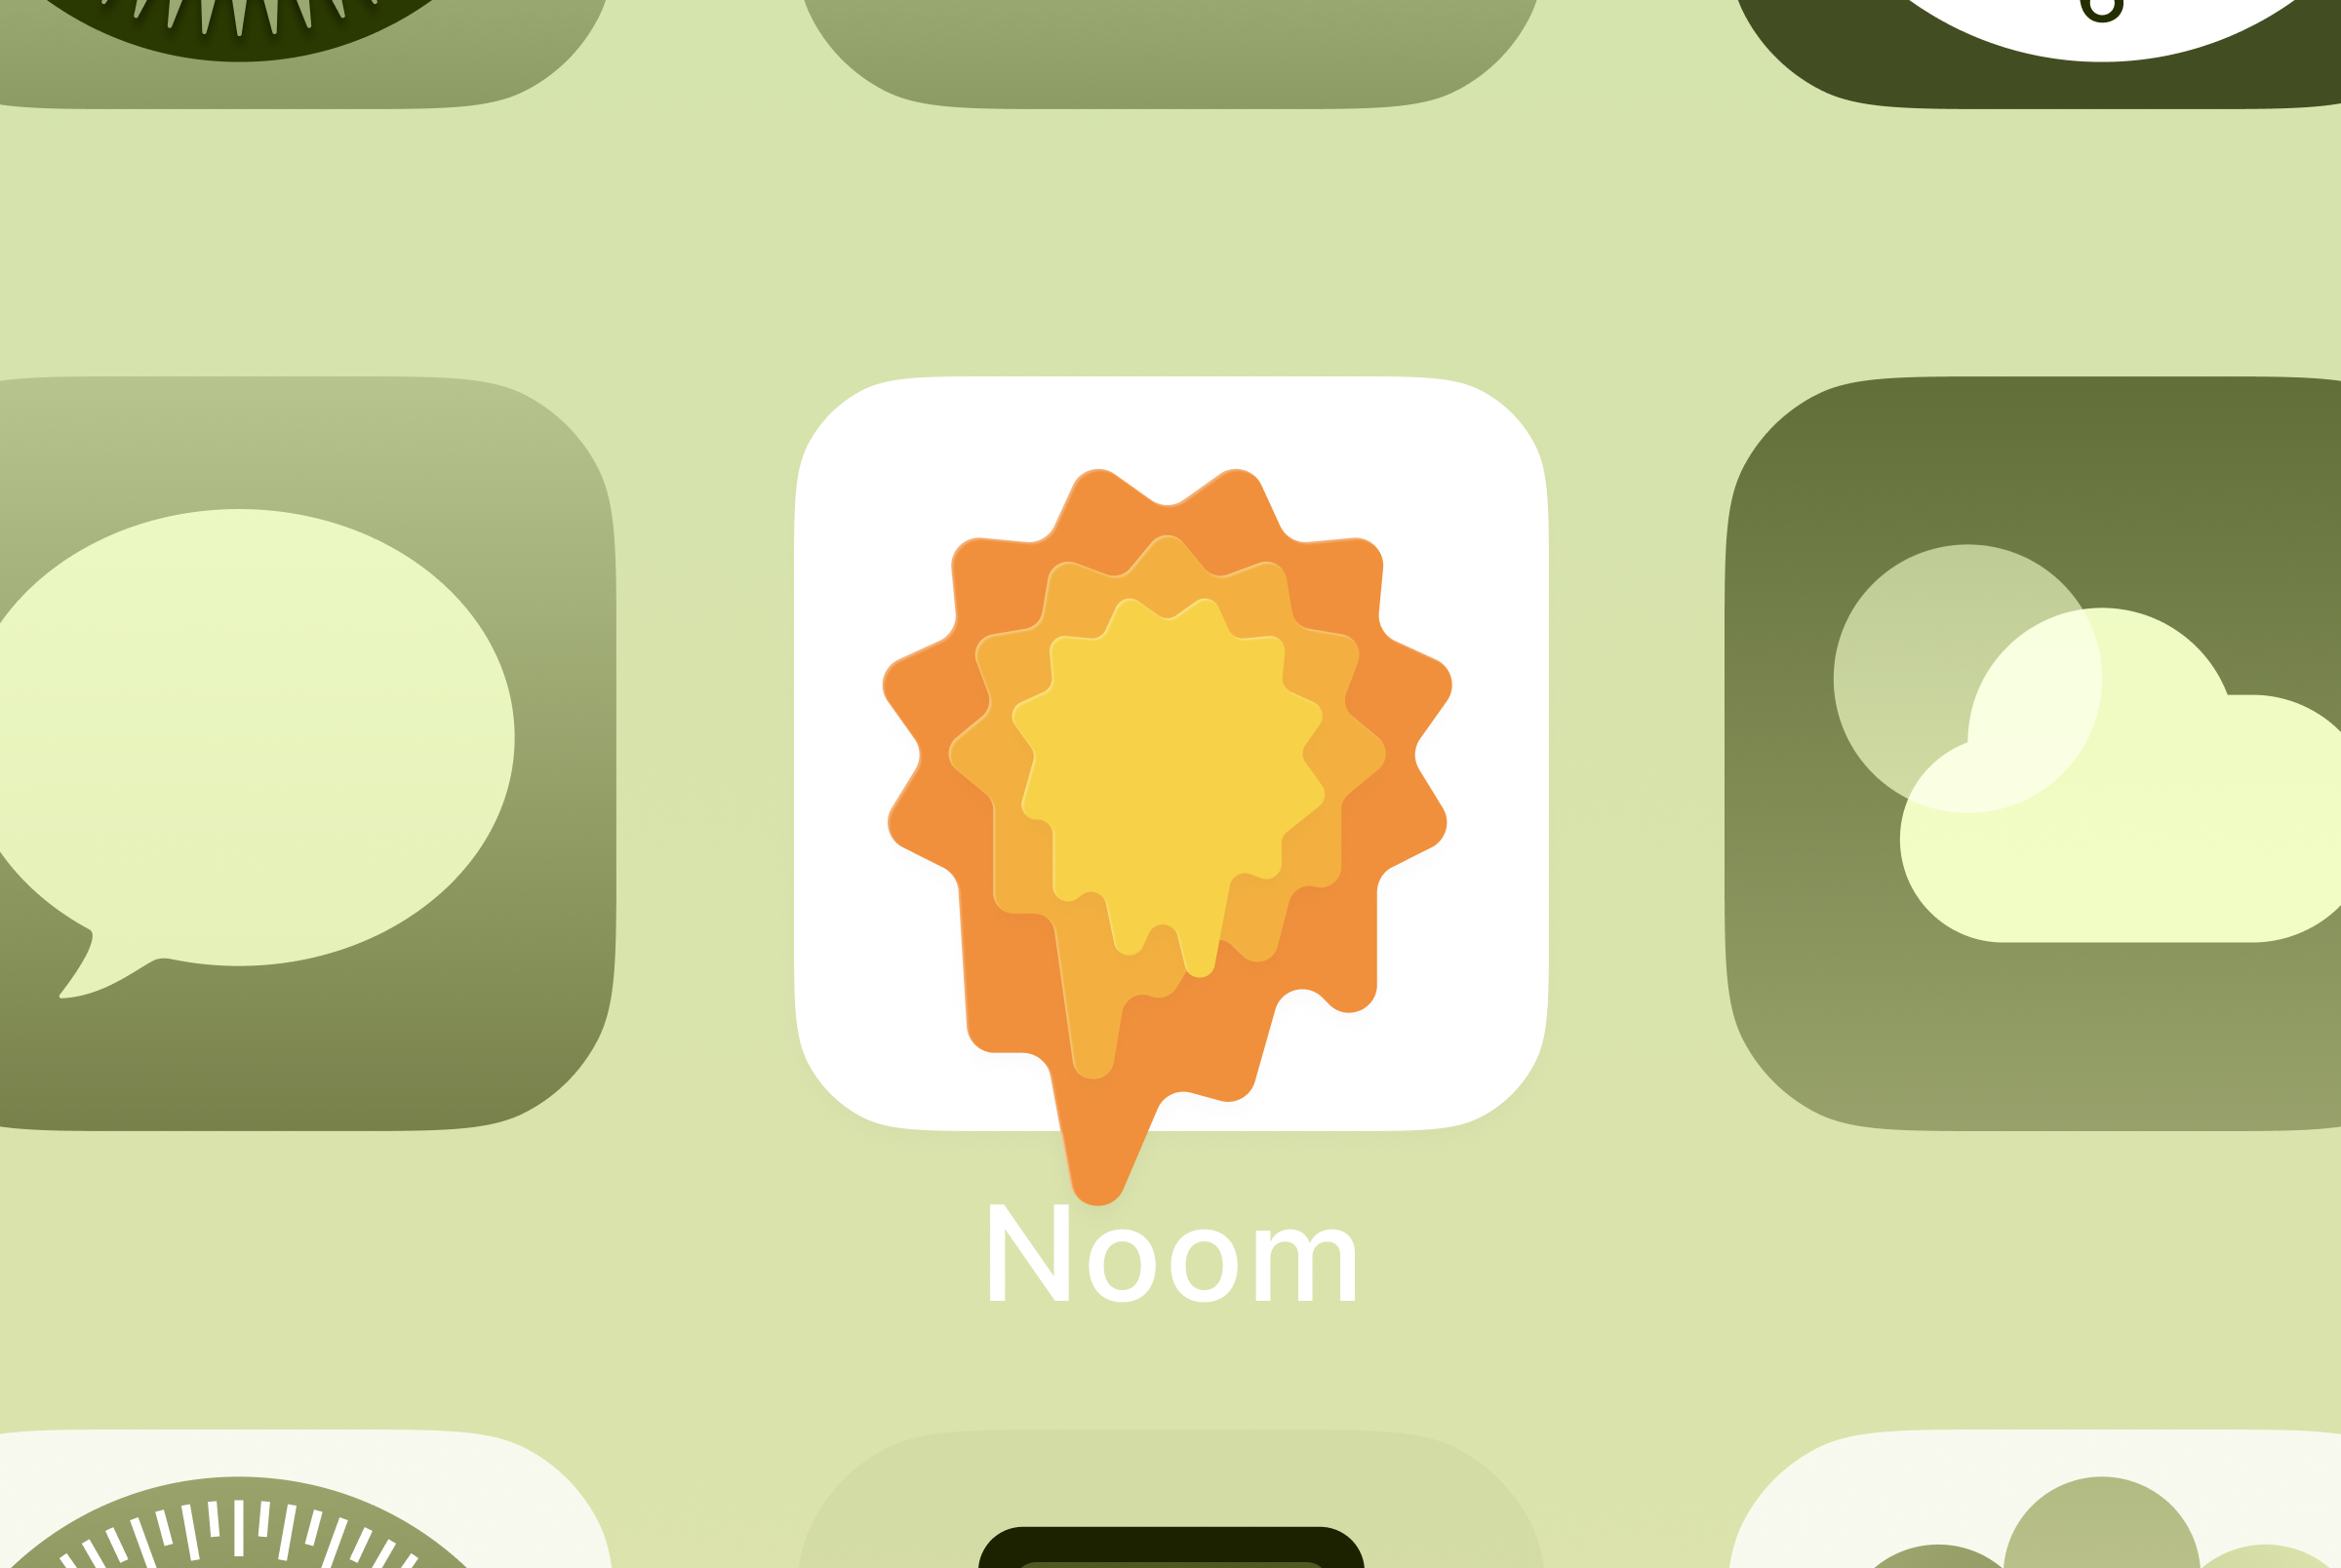 What is your experience using Noom? - Quora